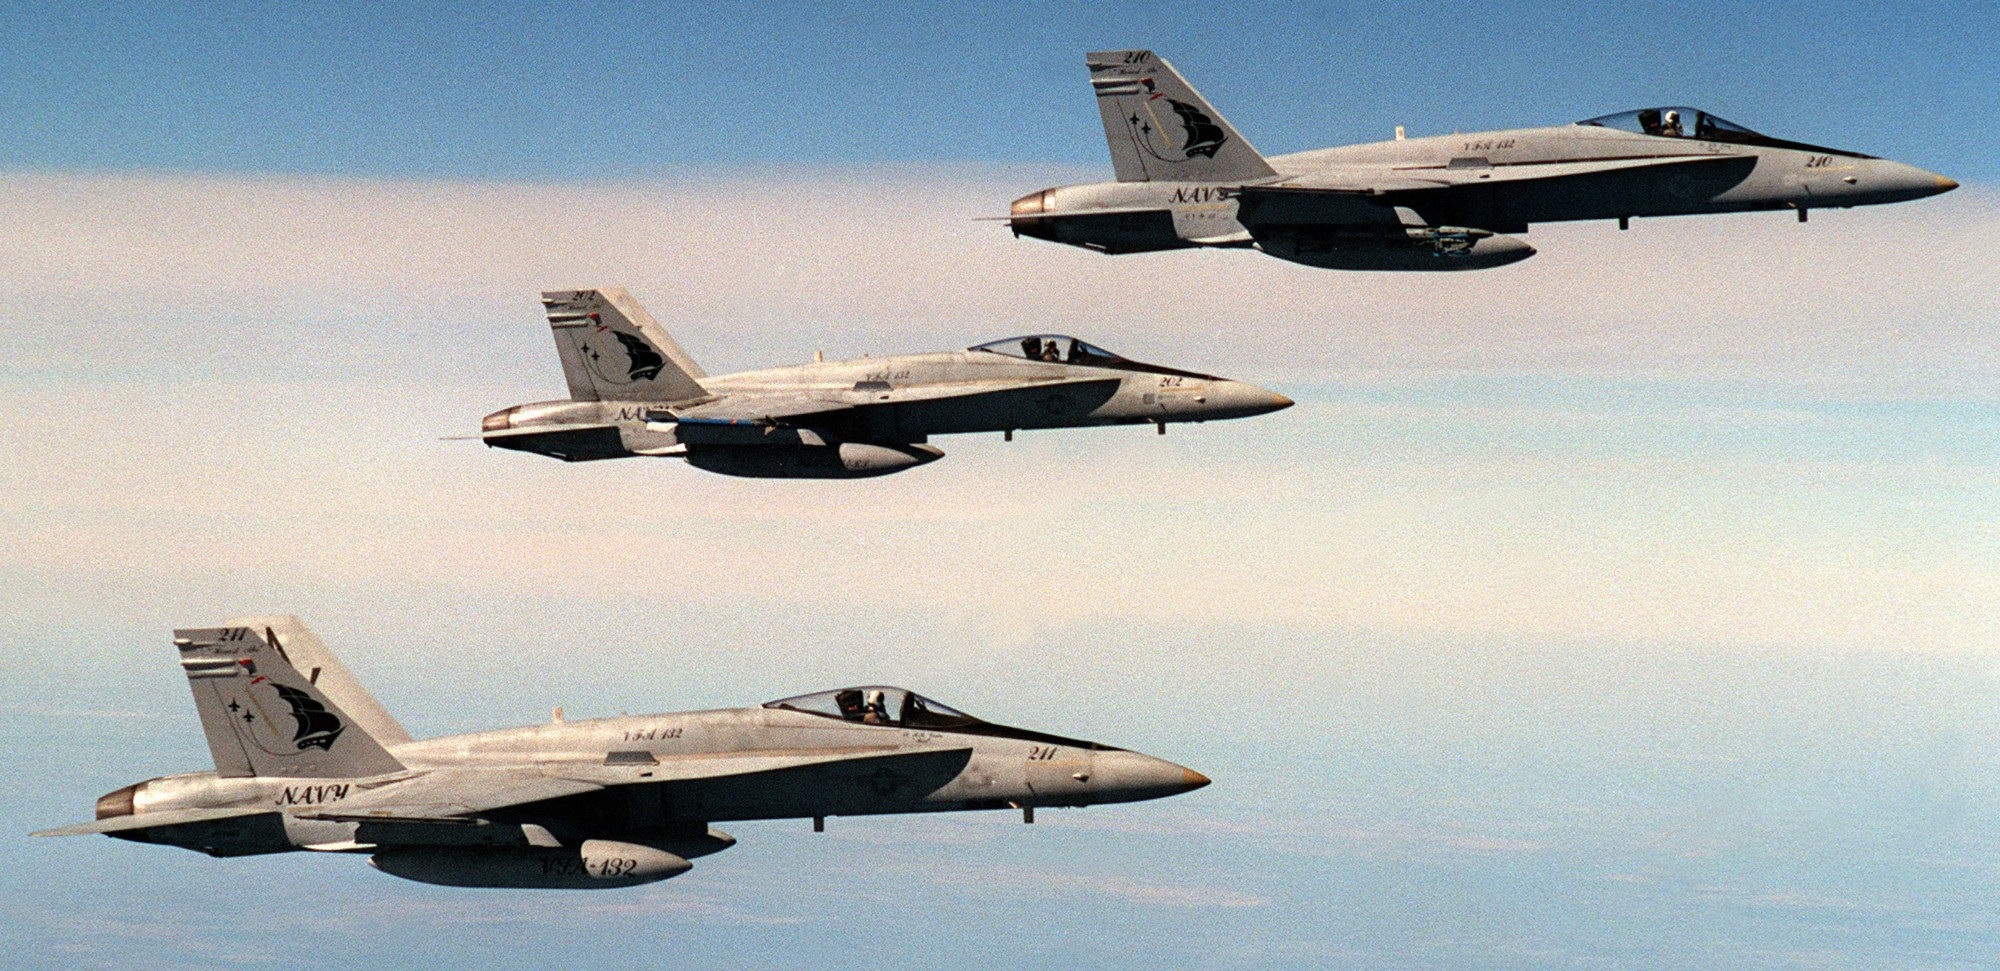 vfa-132 privateers strike fighter squadron f/a-18a hornet cvw-13 uss abraham lincoln cvn-72 1990 16